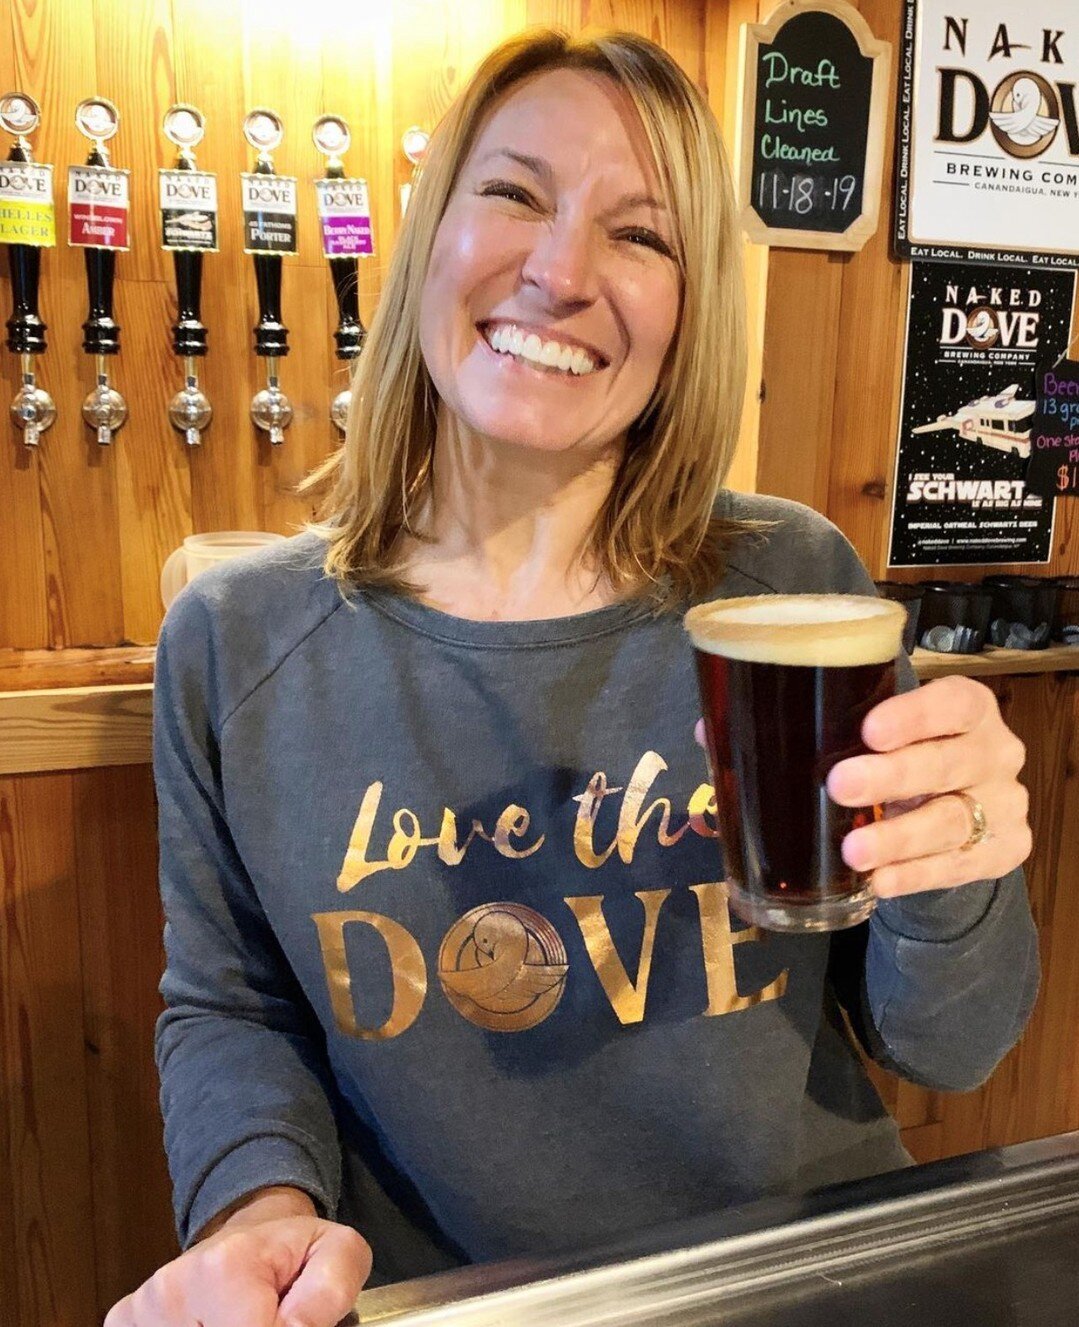 Warm hospitality and cold drafts. That&rsquo;s Winter in Canandaigua.
.
If you&rsquo;re all about staying warm and snug while sipping cold drafts, then @nakeddove is for you.
.
Hospitality - 10/10
Beer - 10/10
Vibes - 10/10
.
Add visiting @nakeddove 